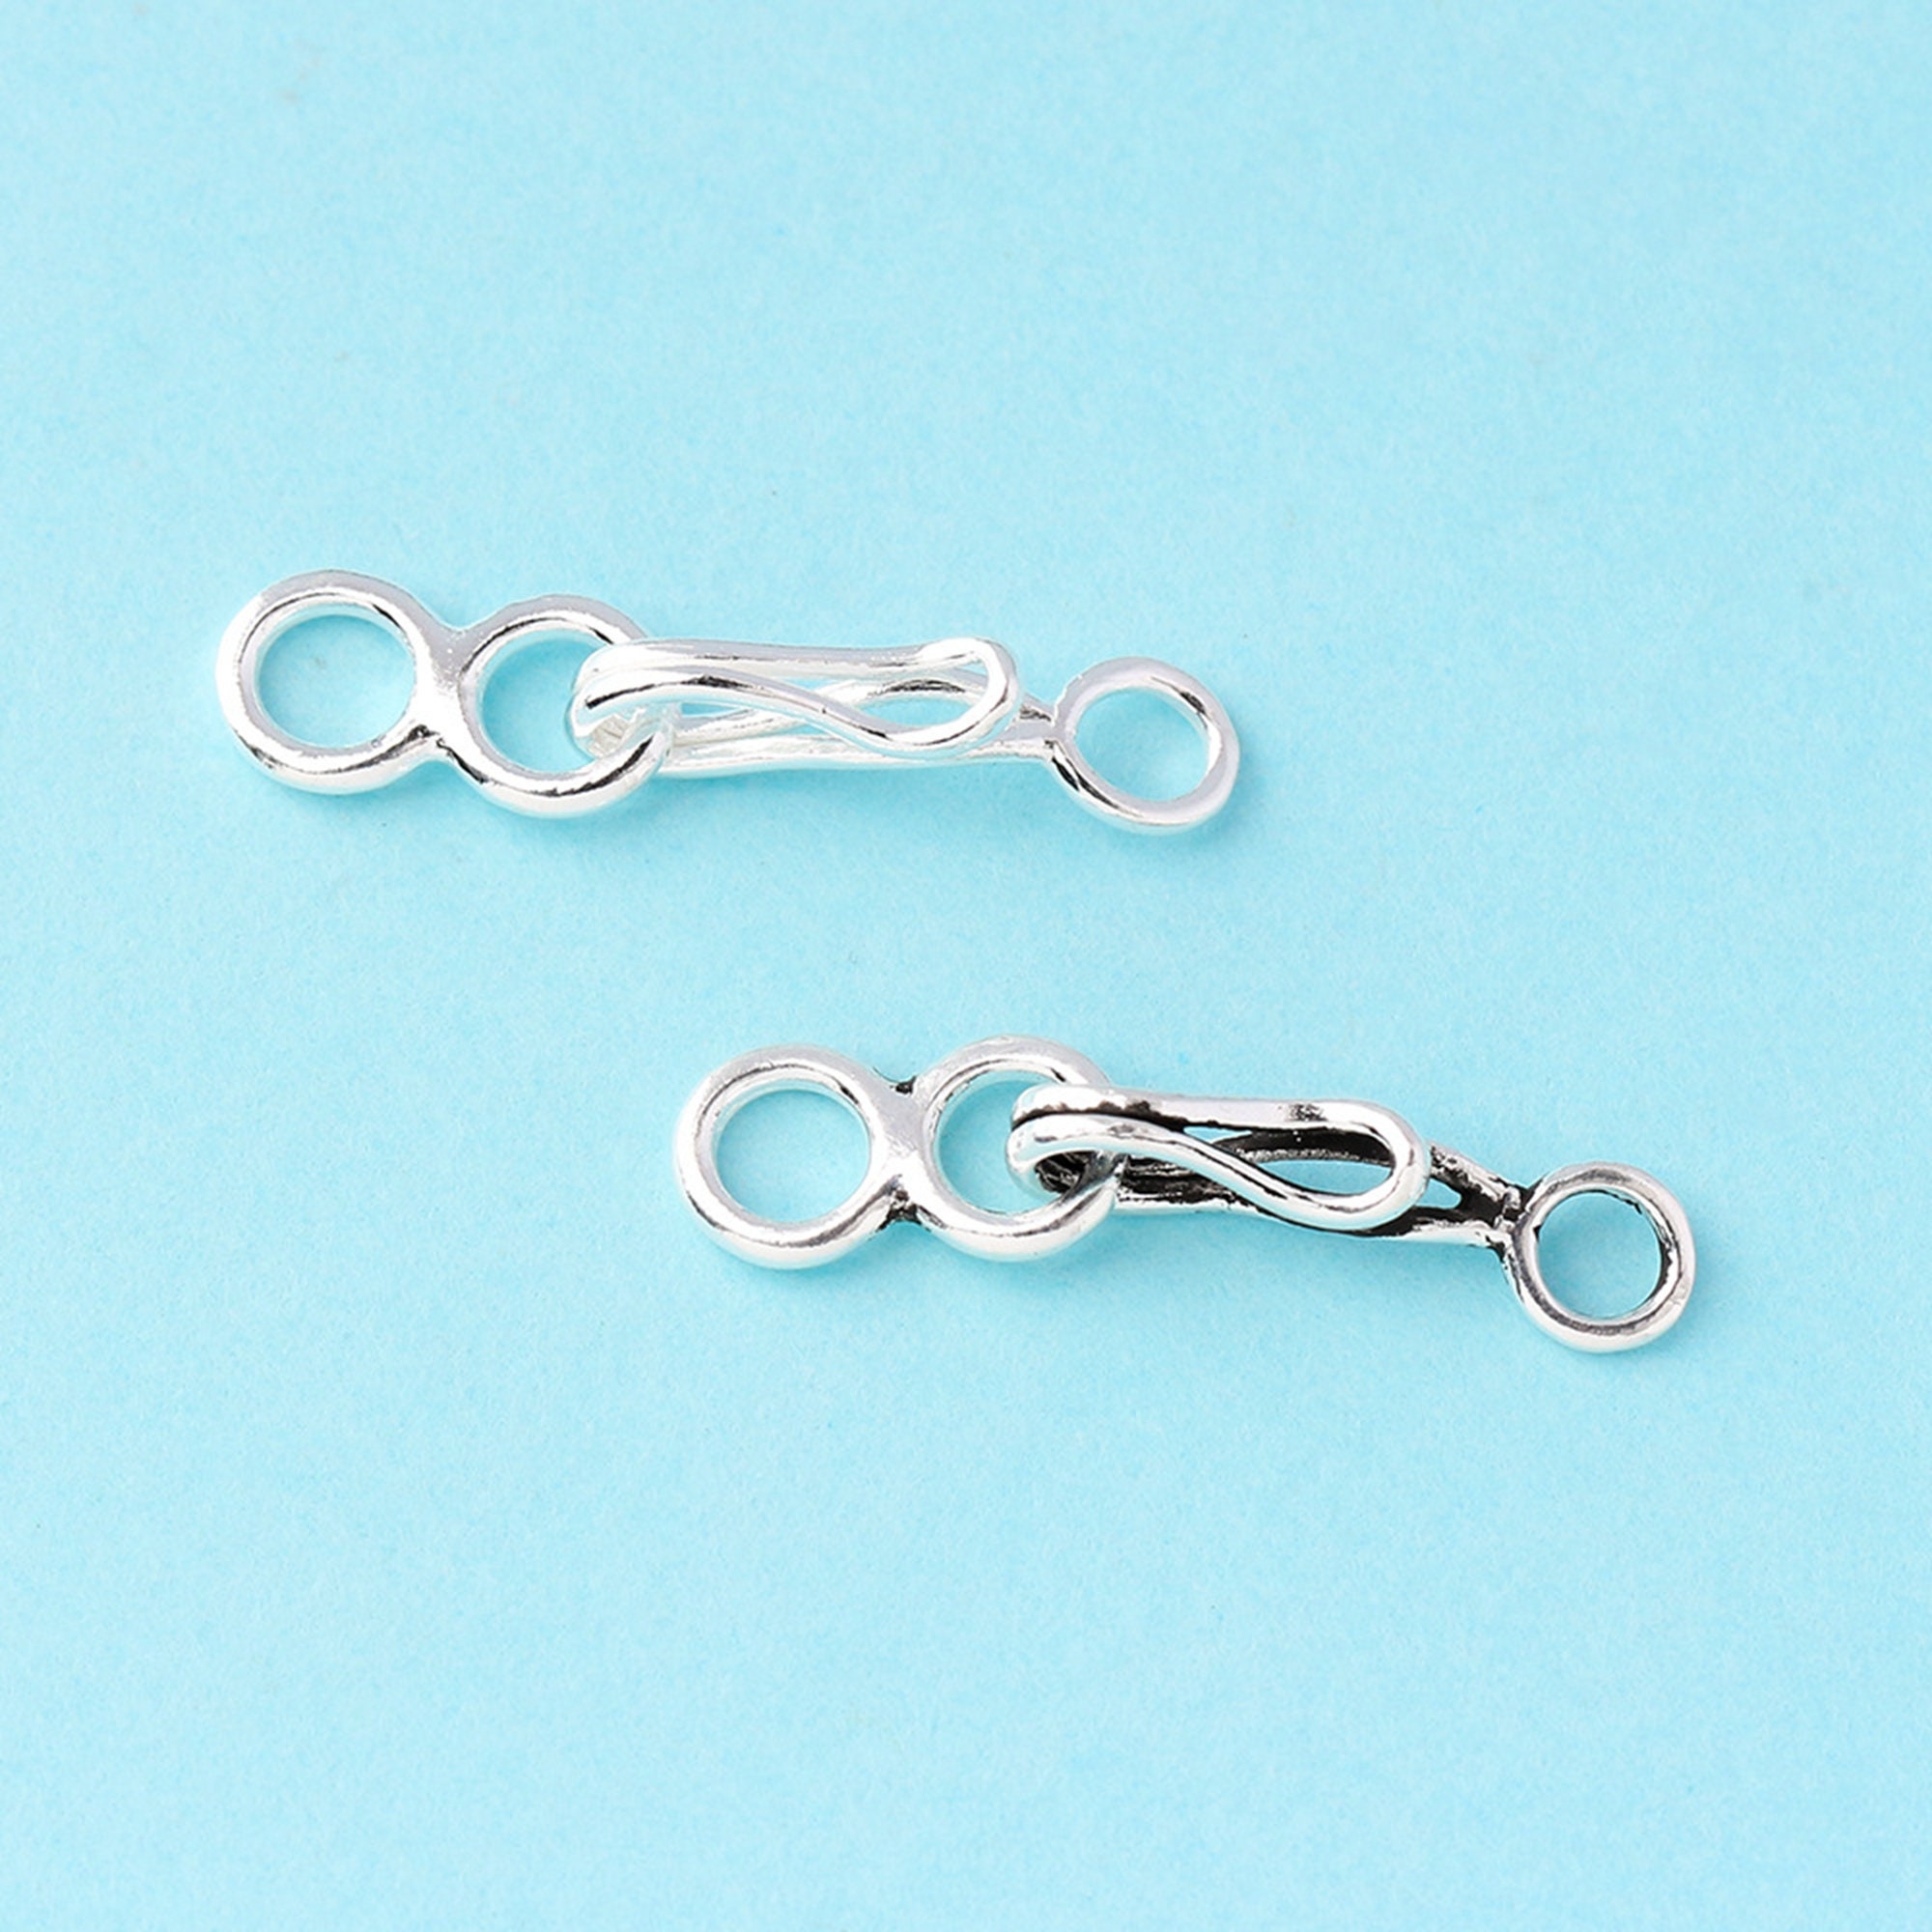 Sterling Silver Hook and Eye Clasps, Hook Clasp for Jewelry Supplies, Hook  and Eye Connectors, Infinity Connector Clasps, Hook Connectors -  Canada